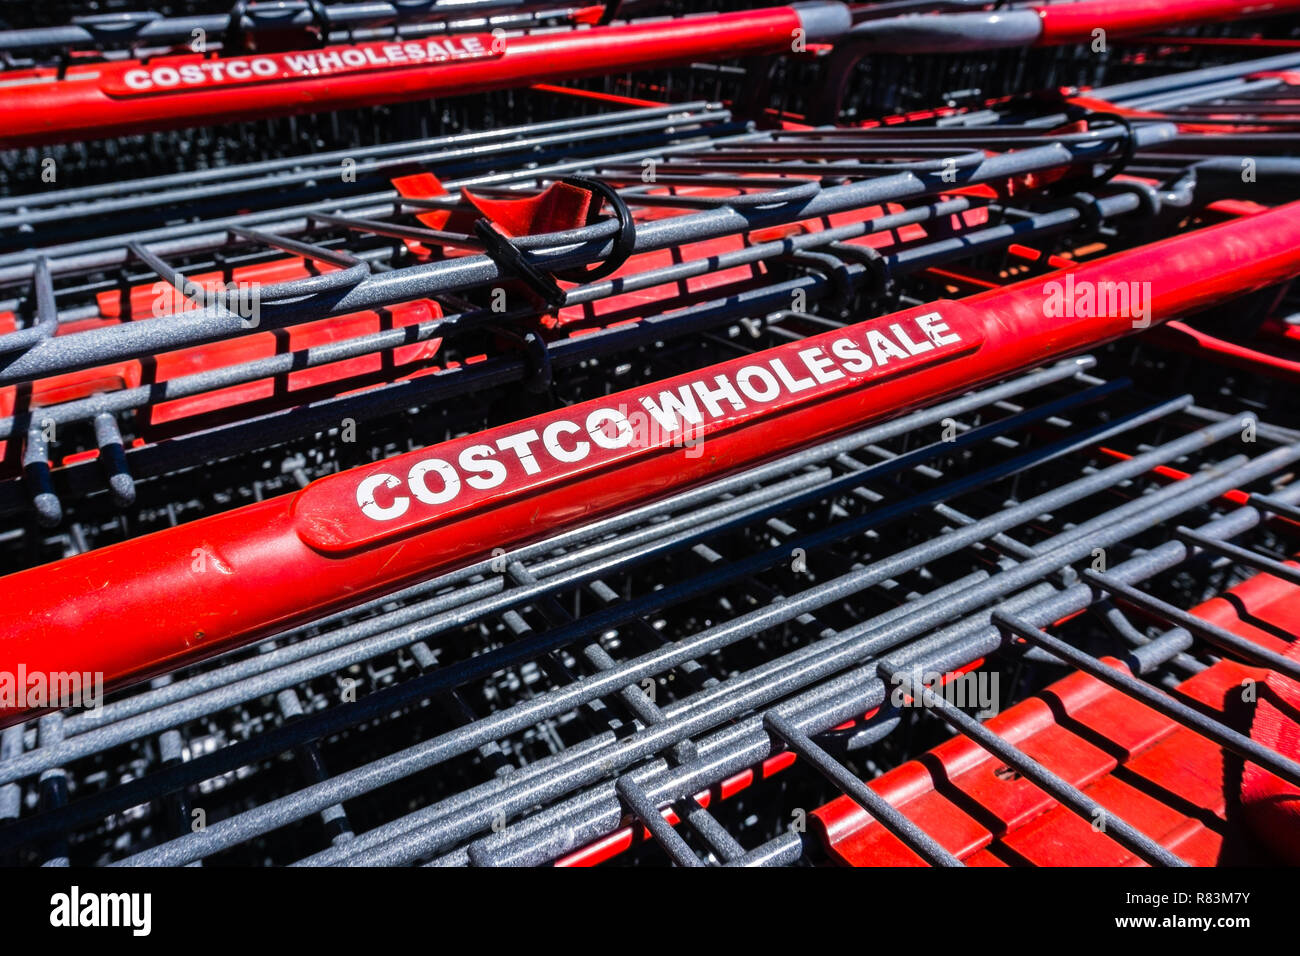 August 6, 2018 Mountain View / CA / USA - Close up of Costco Wholesale logo printed on the shopping carts stacked in front of one of the stores in sou Stock Photo